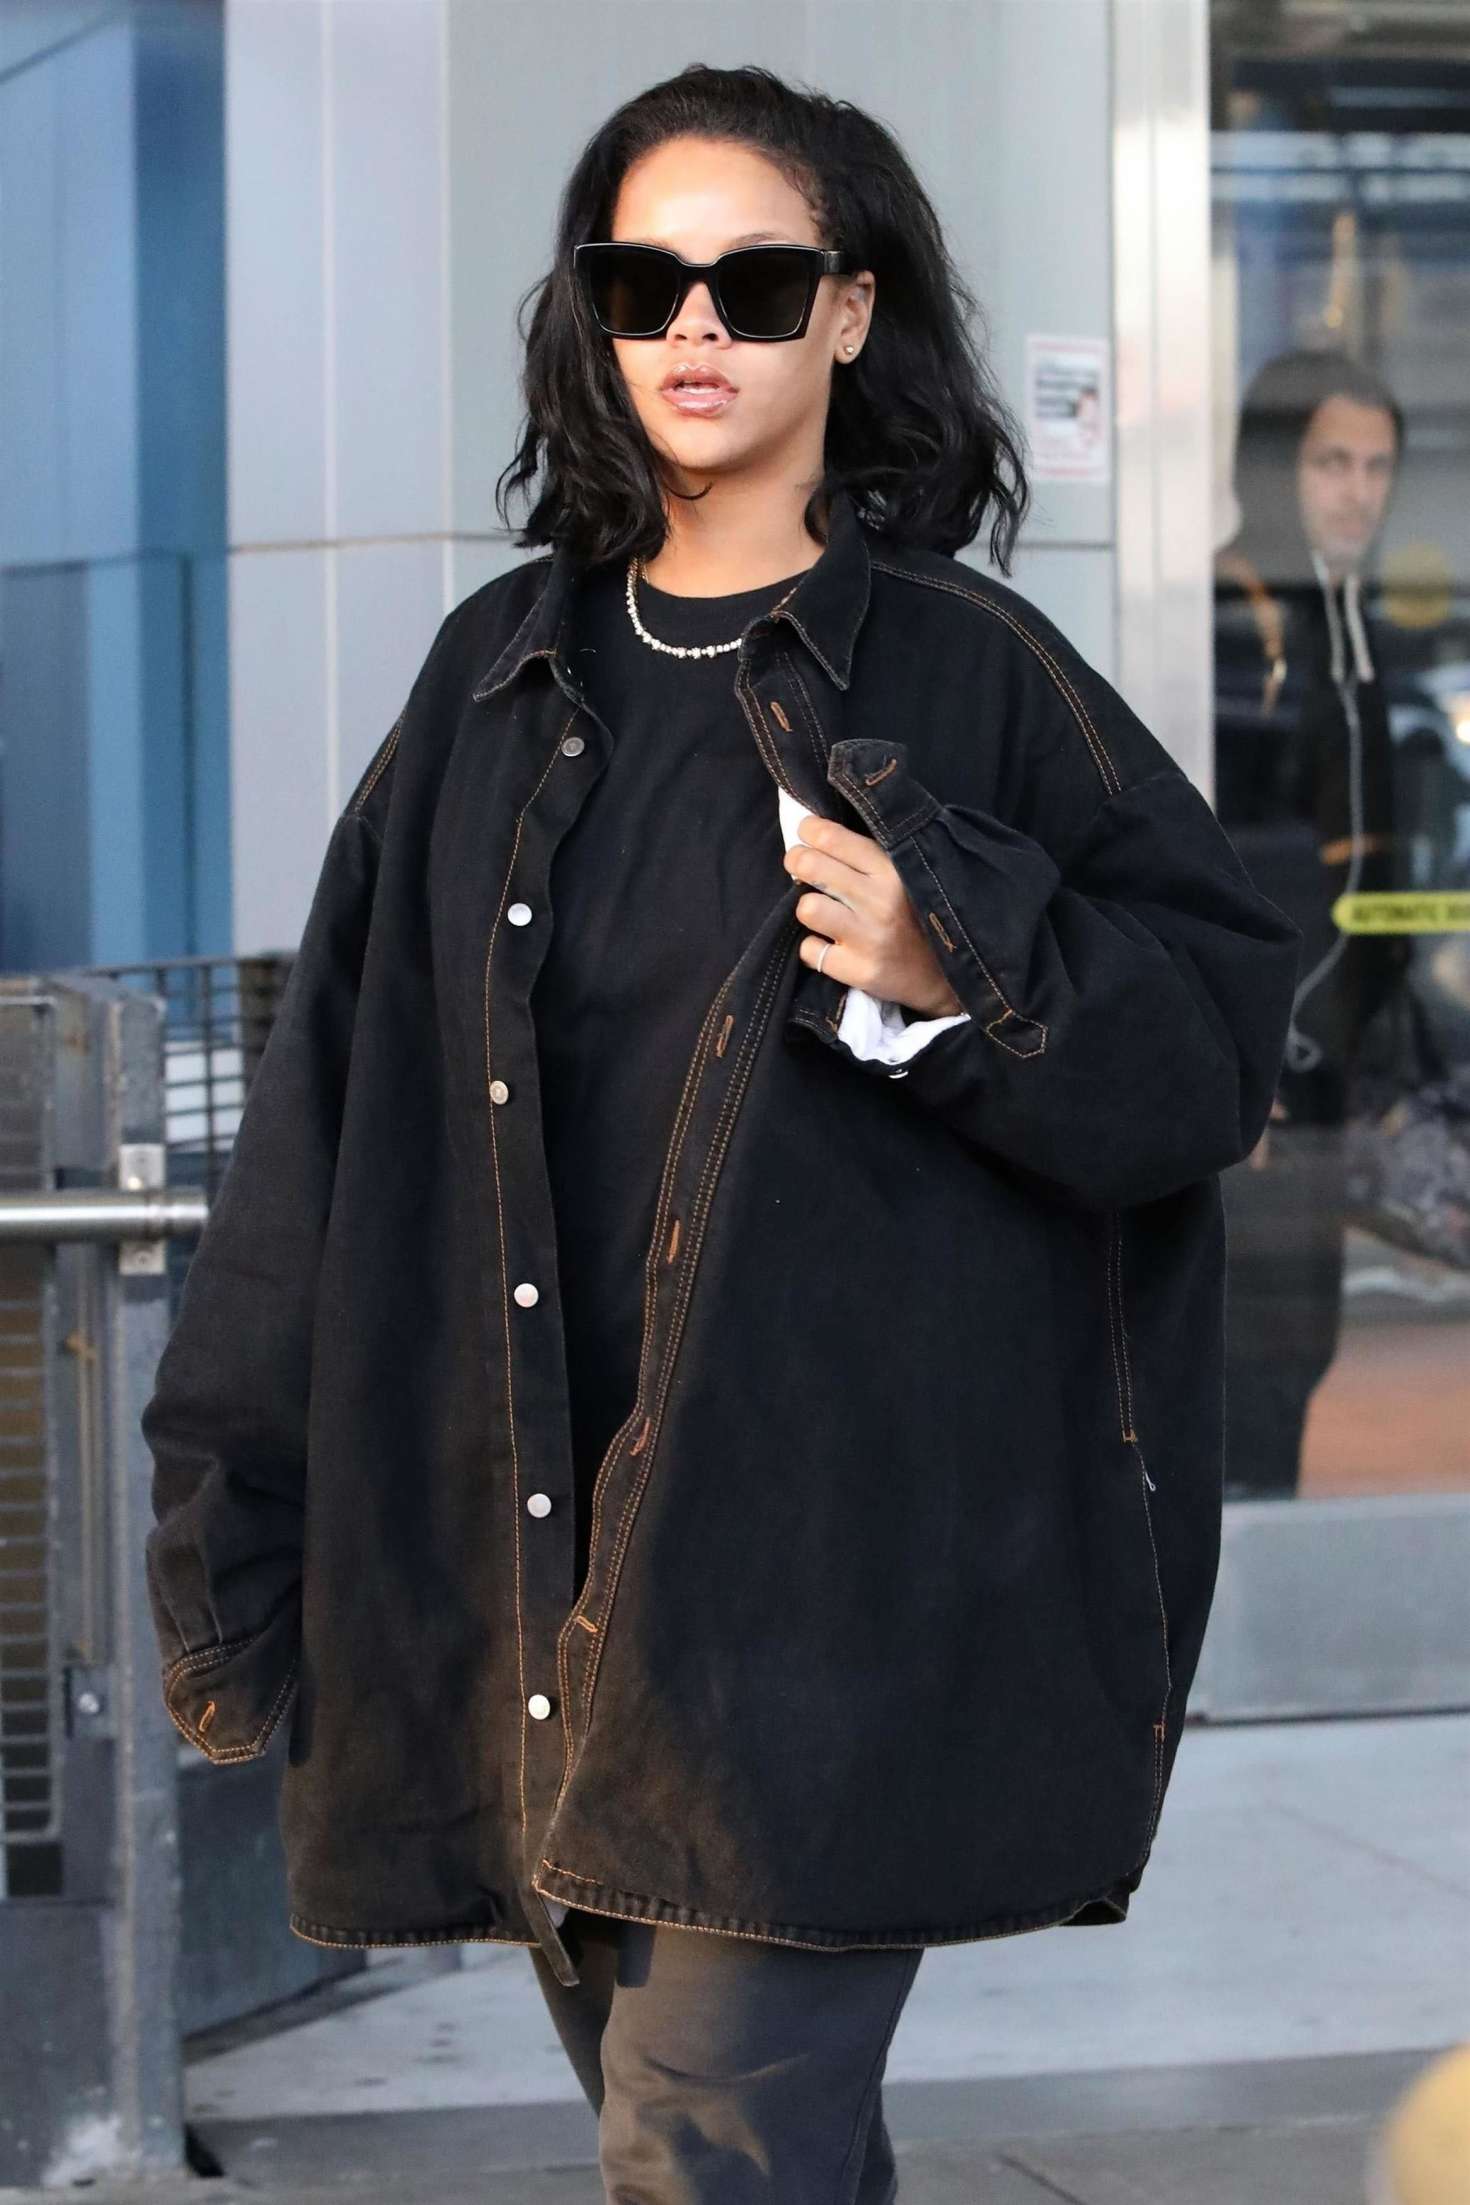 Rihanna â€“ Arriving at JFK Airport in NYC